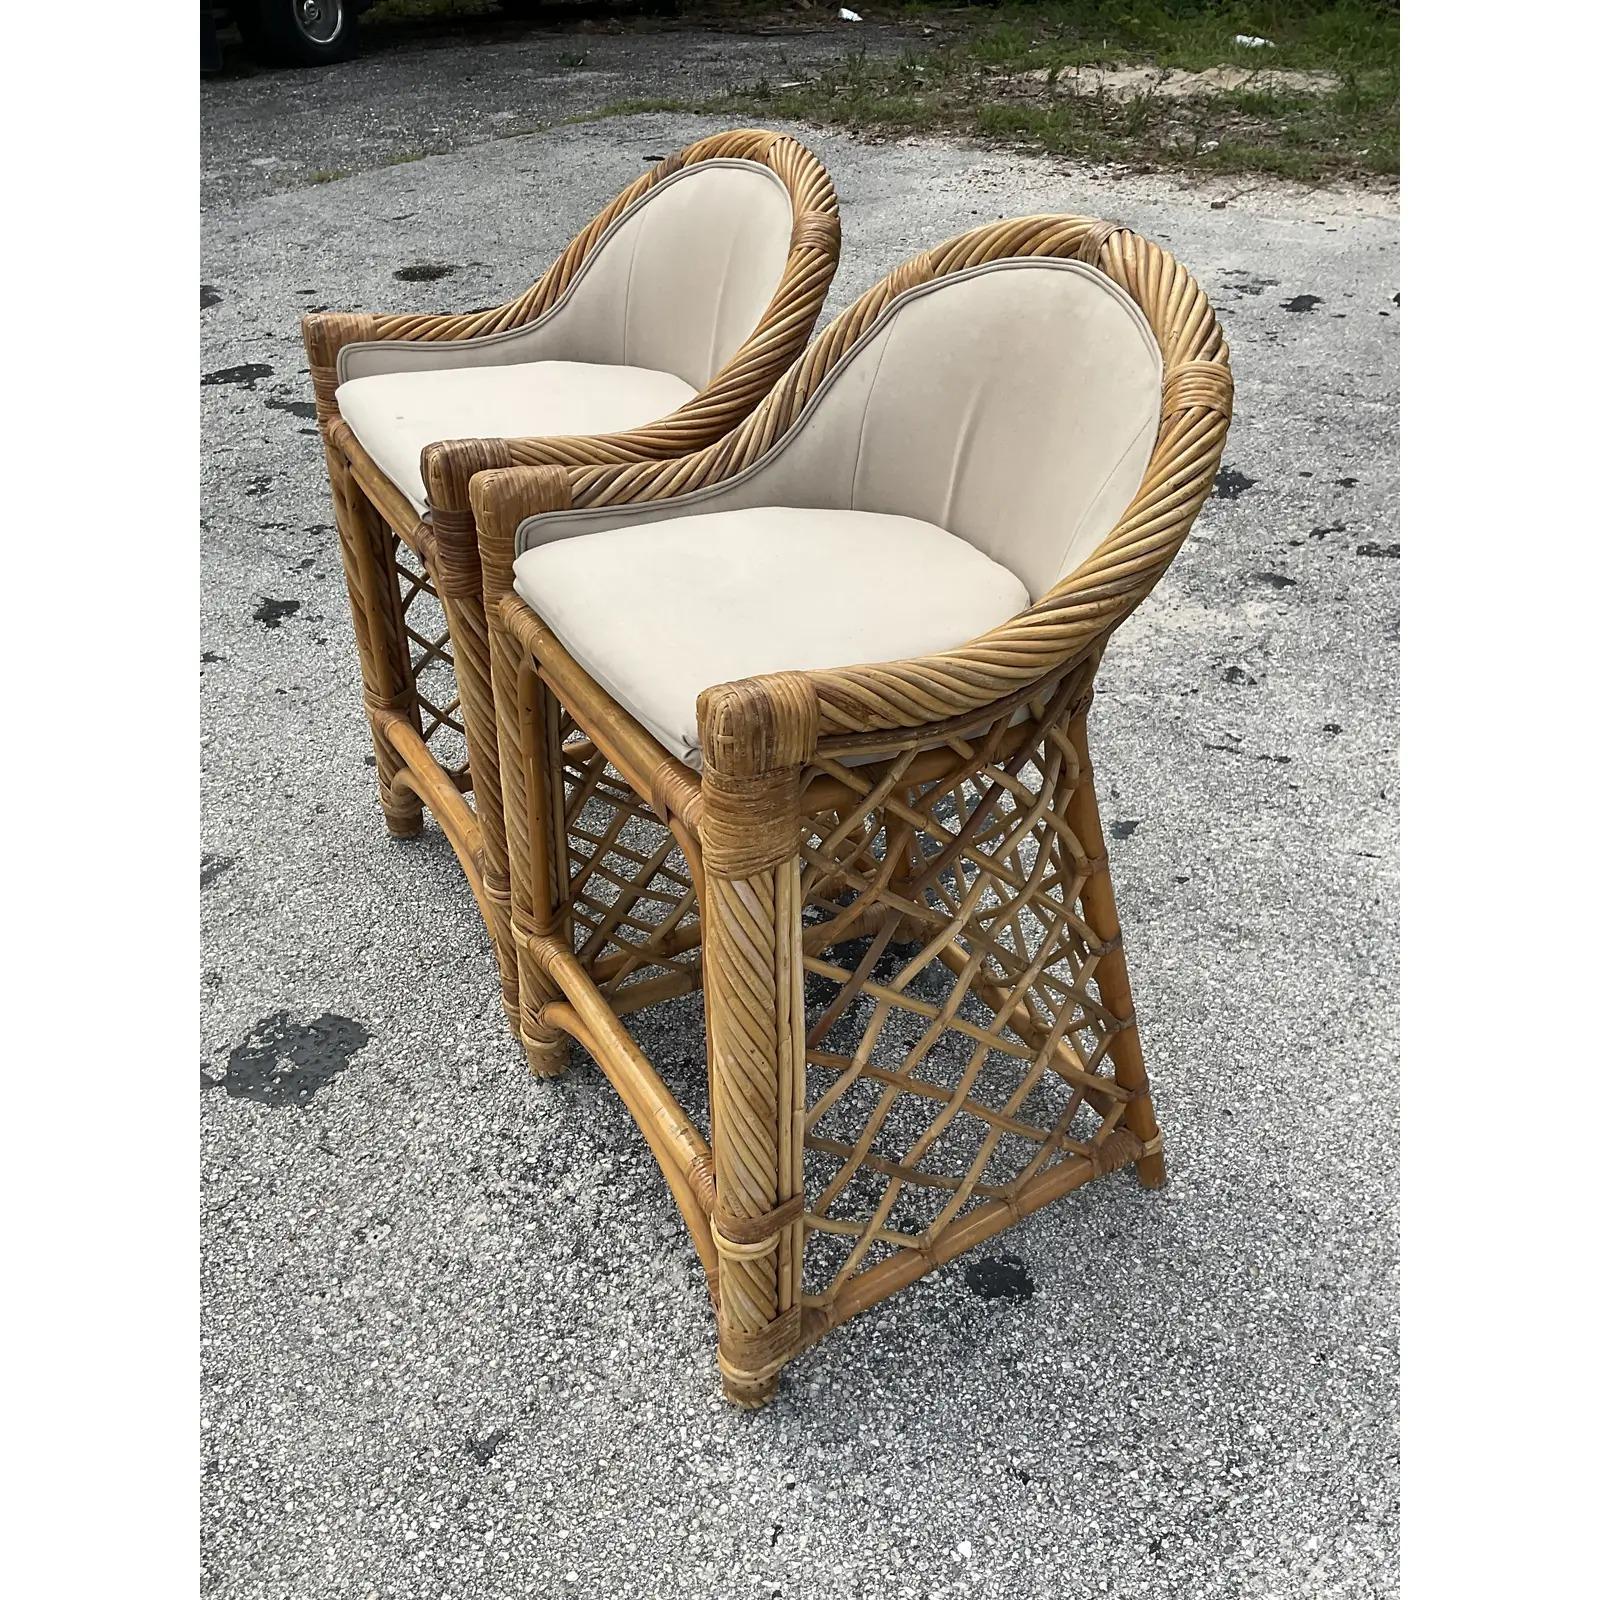 Vintage Coastal Twisted Rattan Barstools - a Pair In Good Condition For Sale In west palm beach, FL